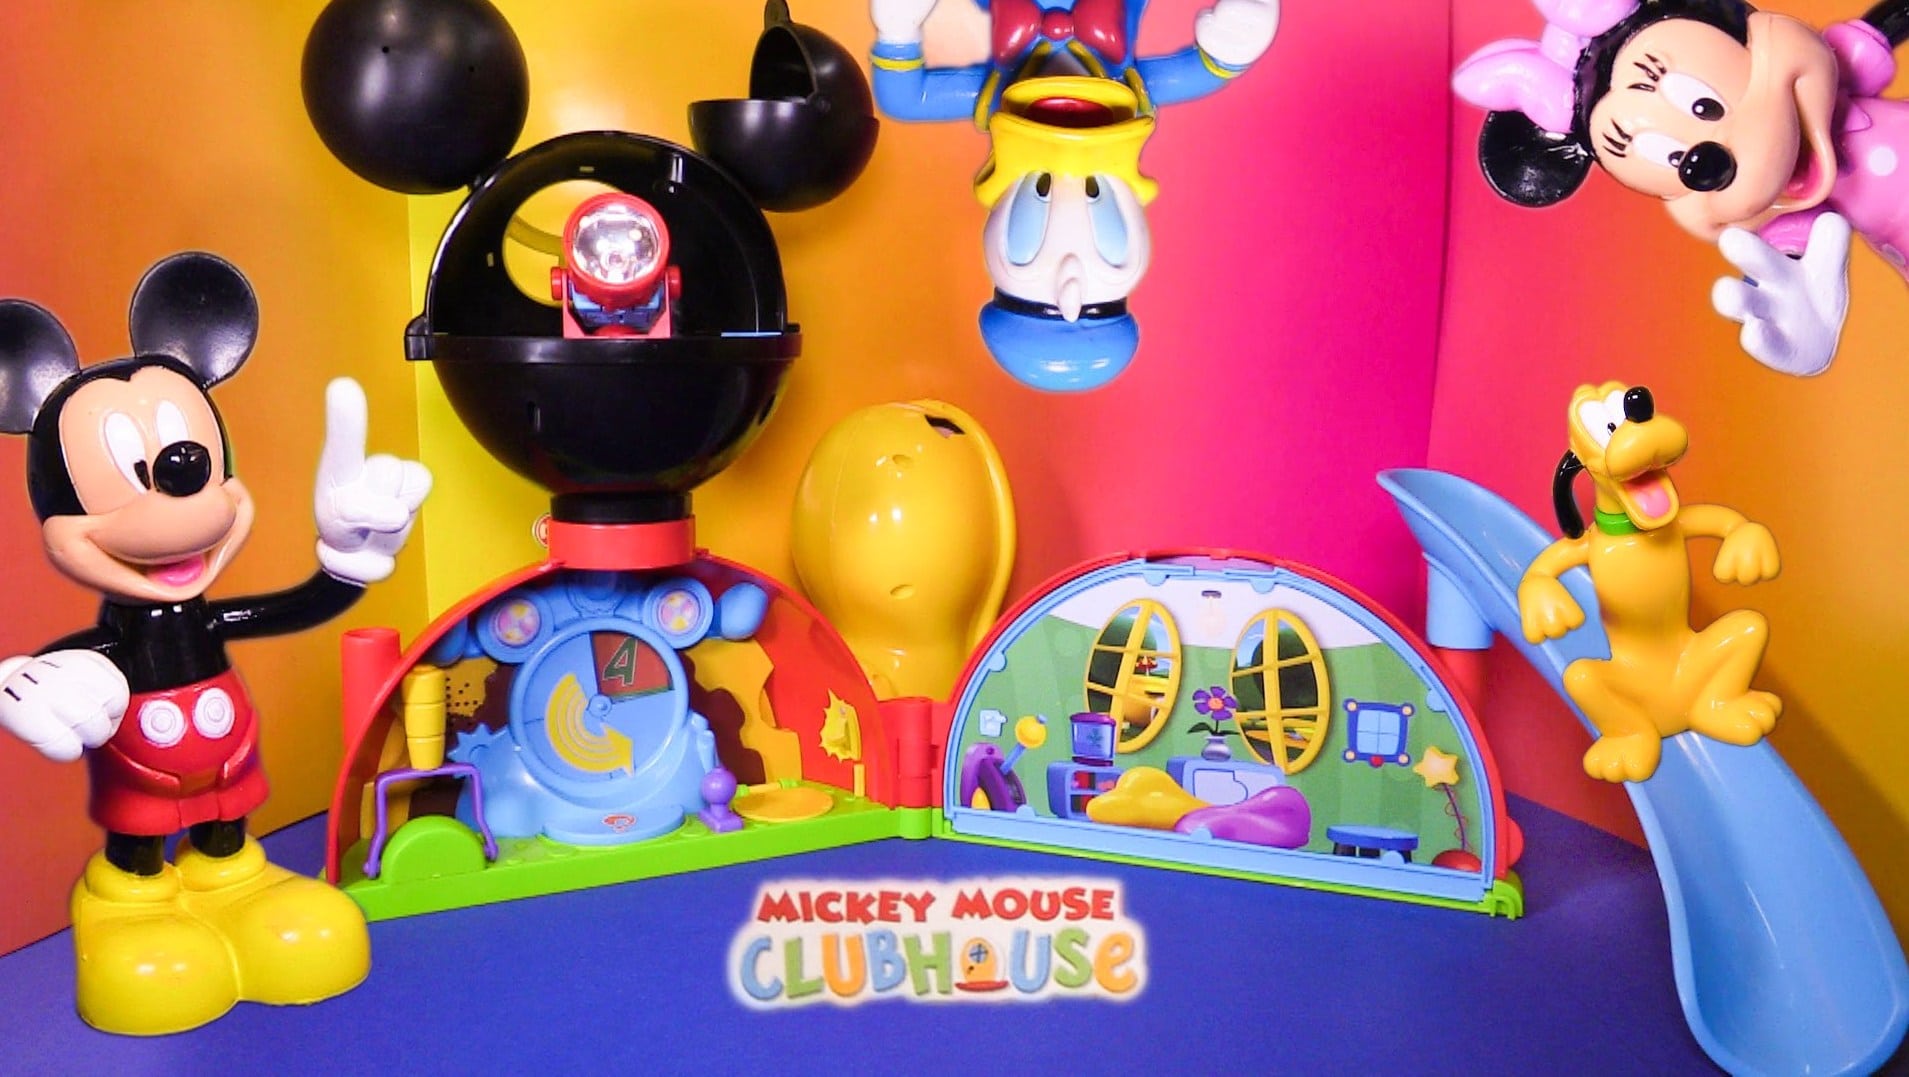 Latest Mickey Mouse Clubhouse Toy Image